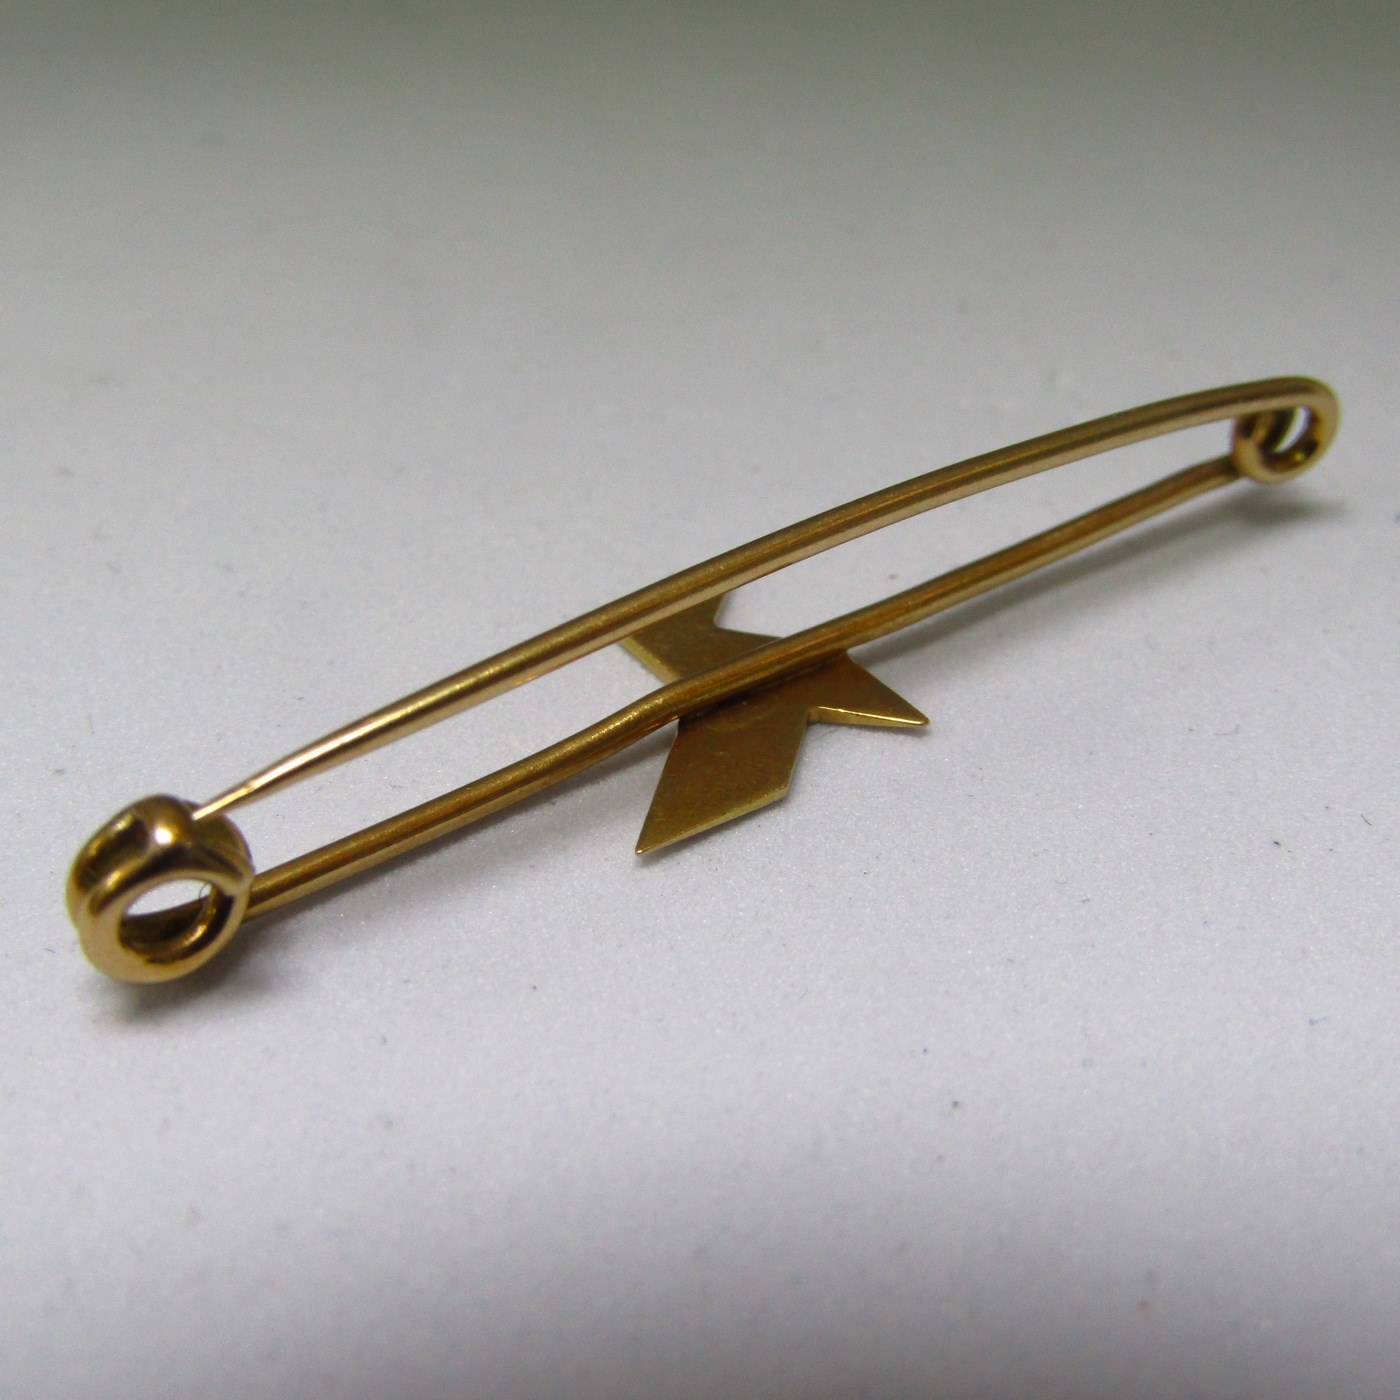 18k Gold tie clip with Origami figure (bow tie). Weight: 2,15 gr. Auctions